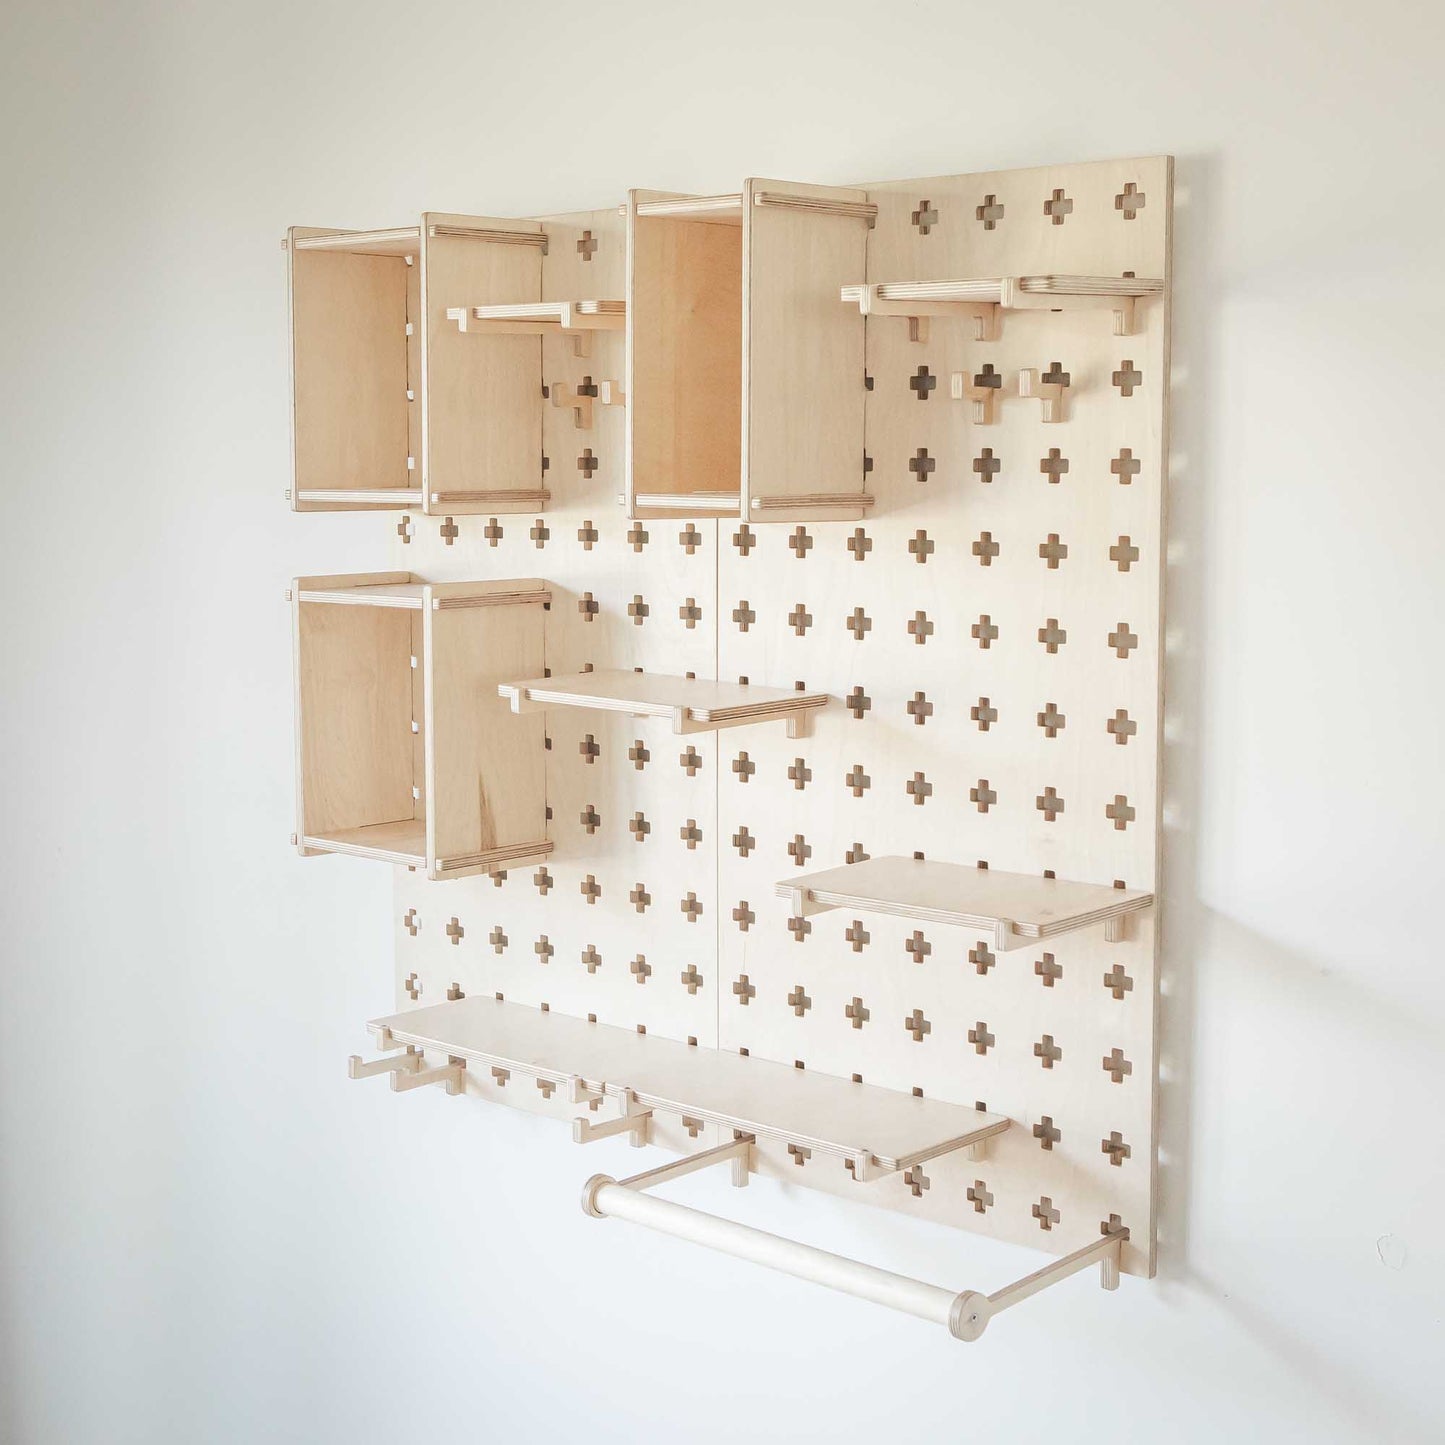 This Large Pegboard Shelf with Clothes Hanger from Sweet HOME from wood is the perfect solution for open storage shelves. Whether you need a pegboard shelf for organizing your tools or creating a functional toddler shelf, this versatile piece offers endless possibilities.